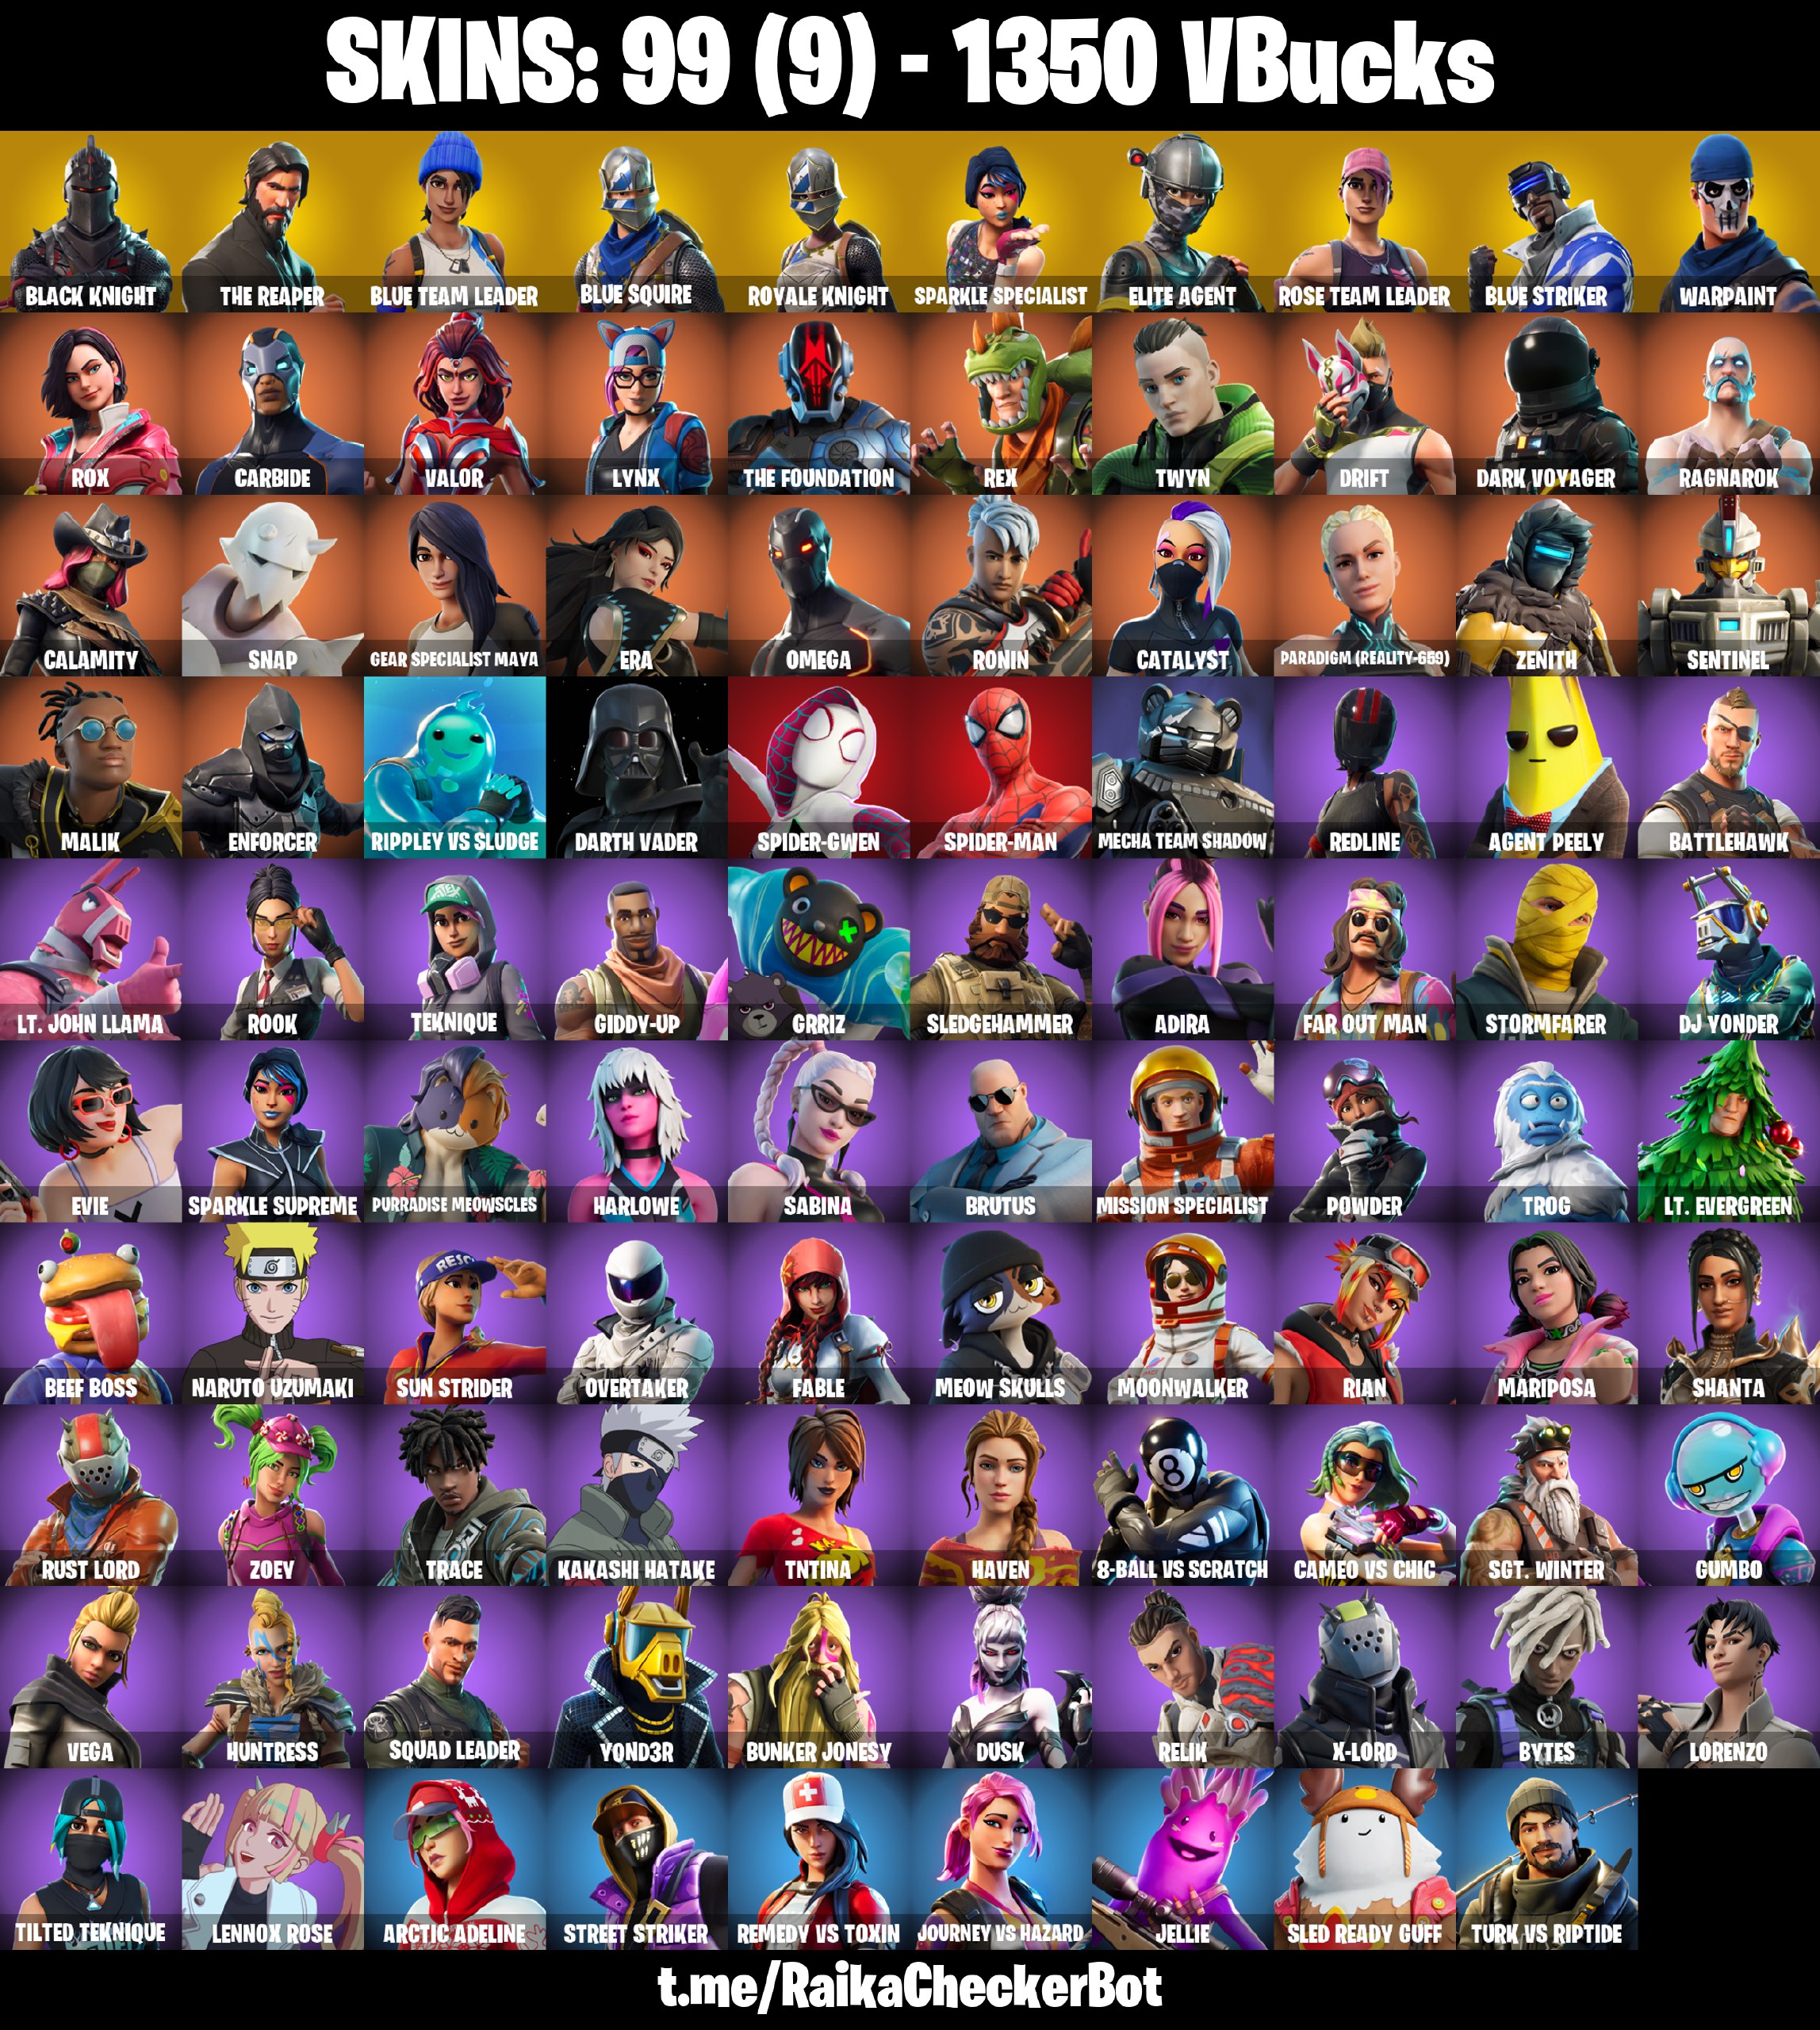 [PC-XBOX] 99 skins | Black Knight - The Reaper - Blue Team Leader - Blue Squire - Royale Knight - Sparkle Specialist | OG STW | 1350 VB